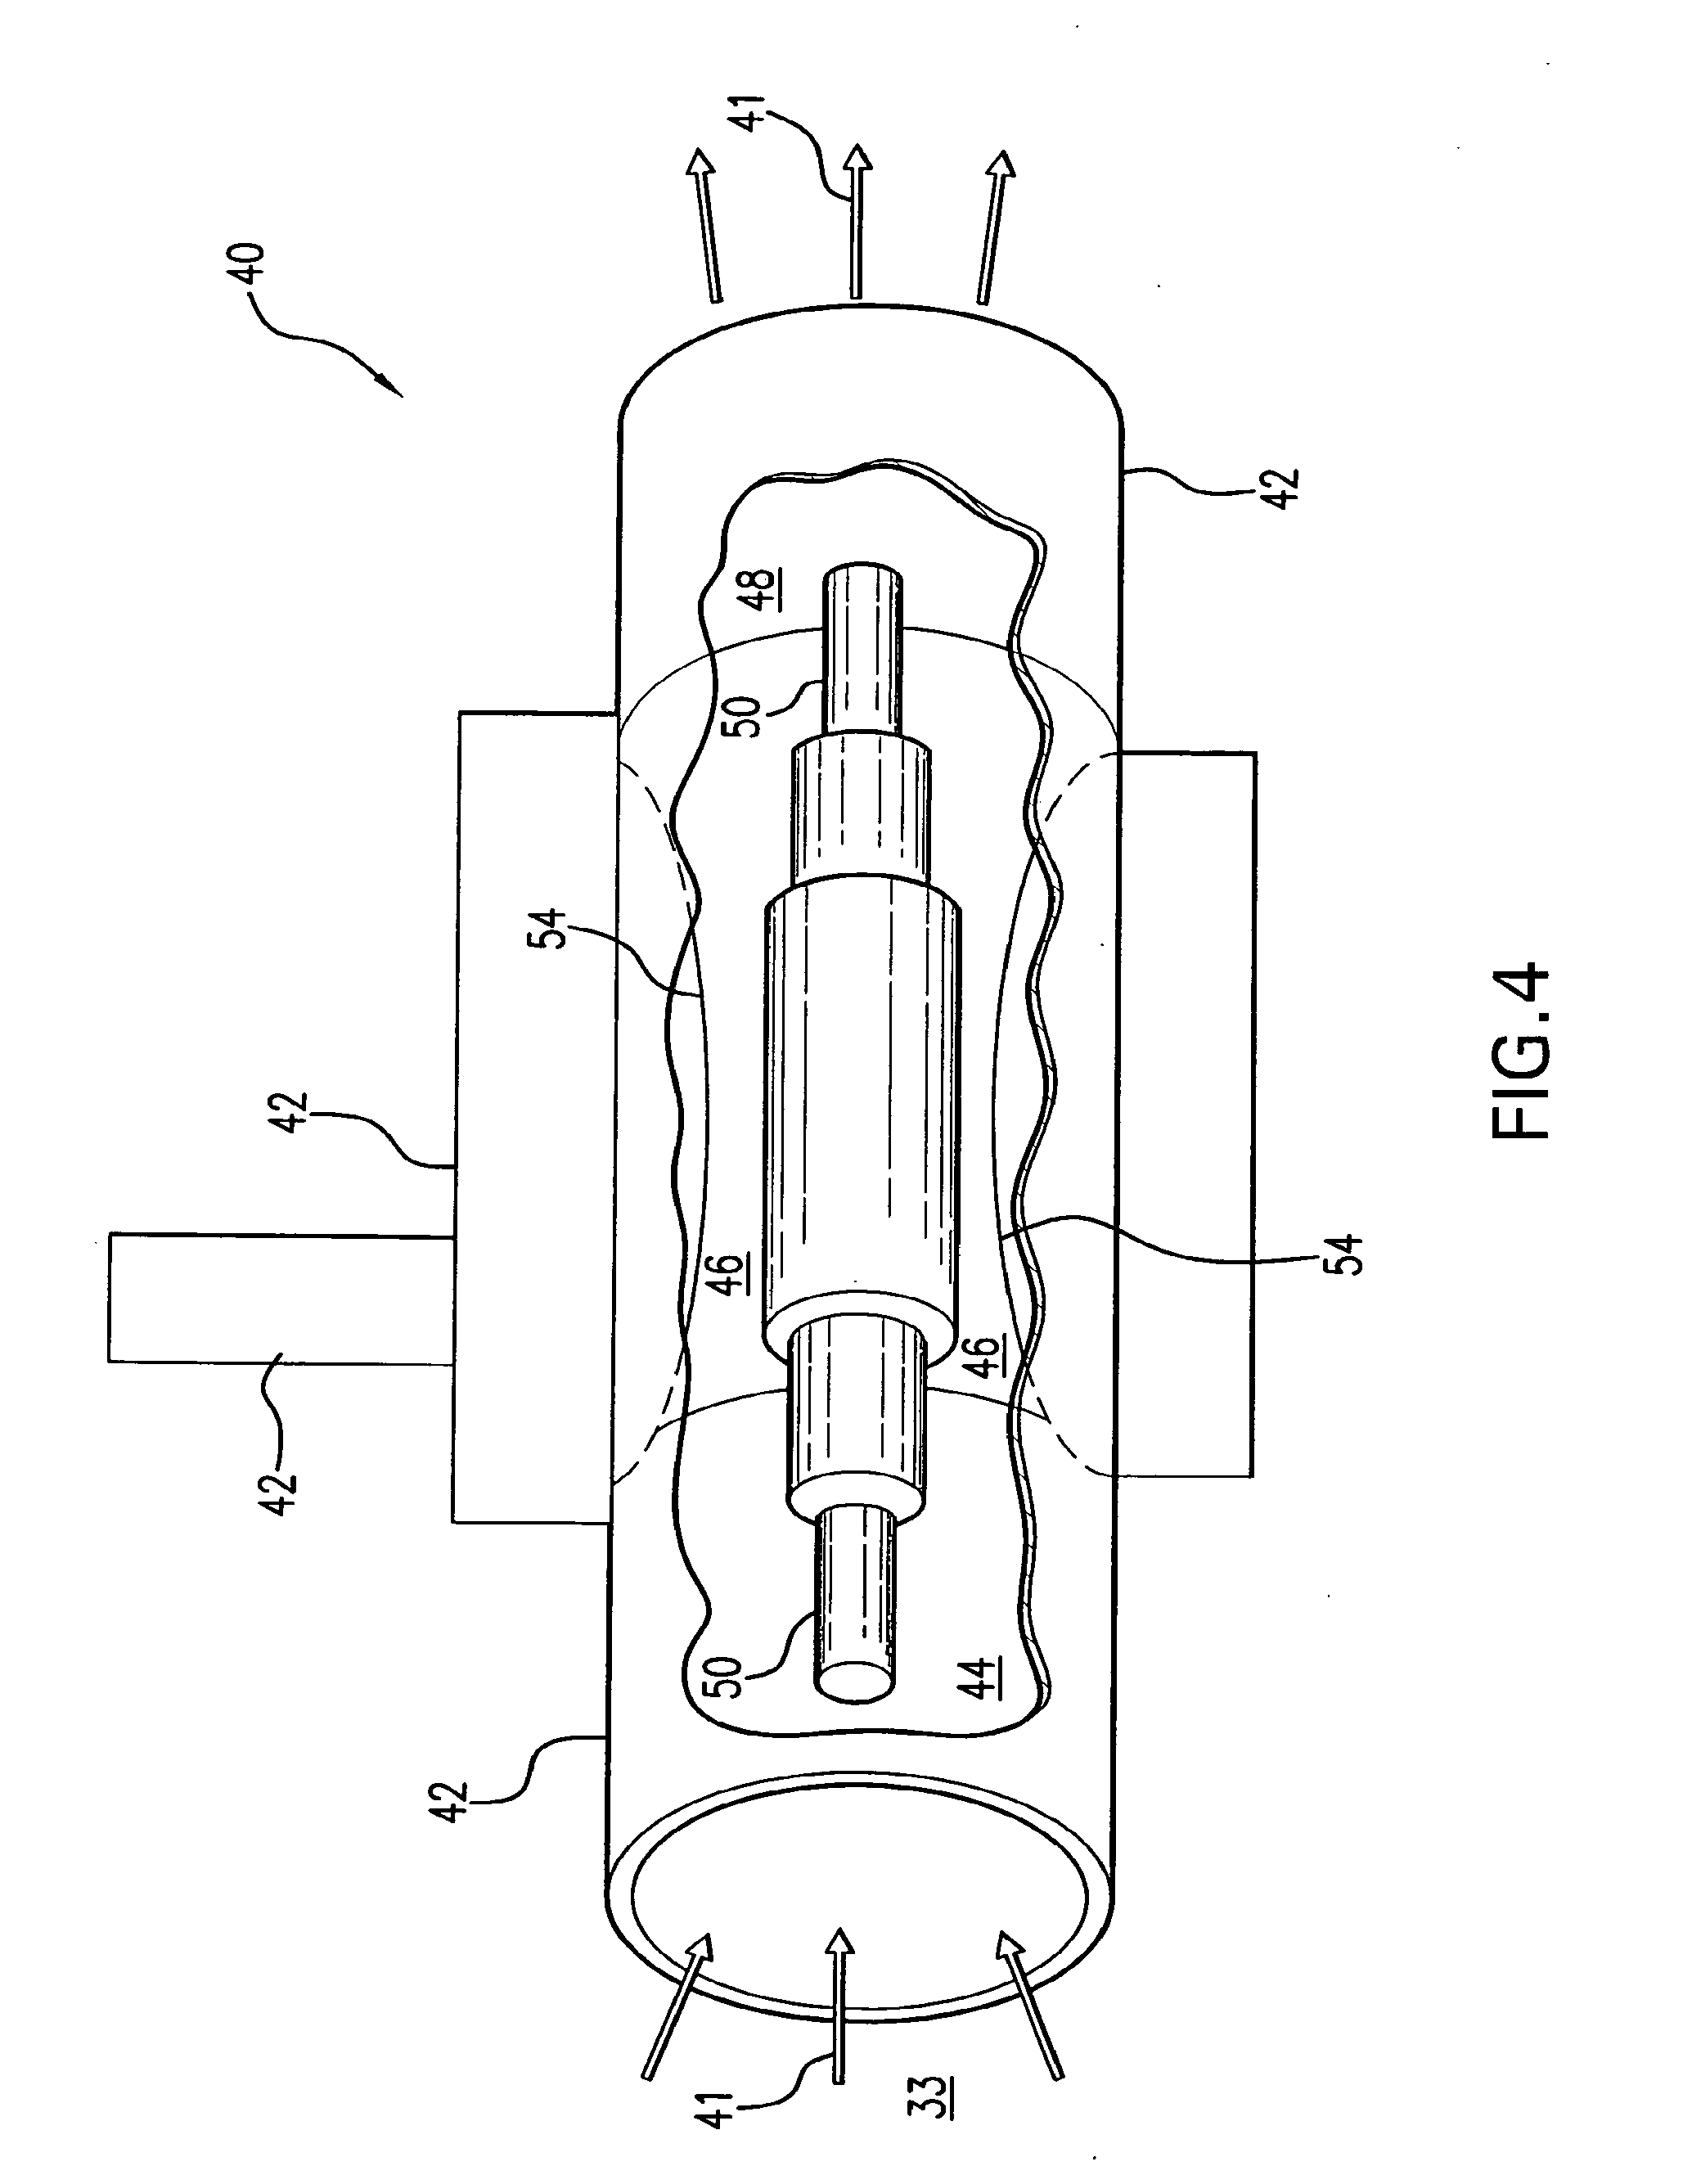 Apparatus and method for treating impurities in air and materials